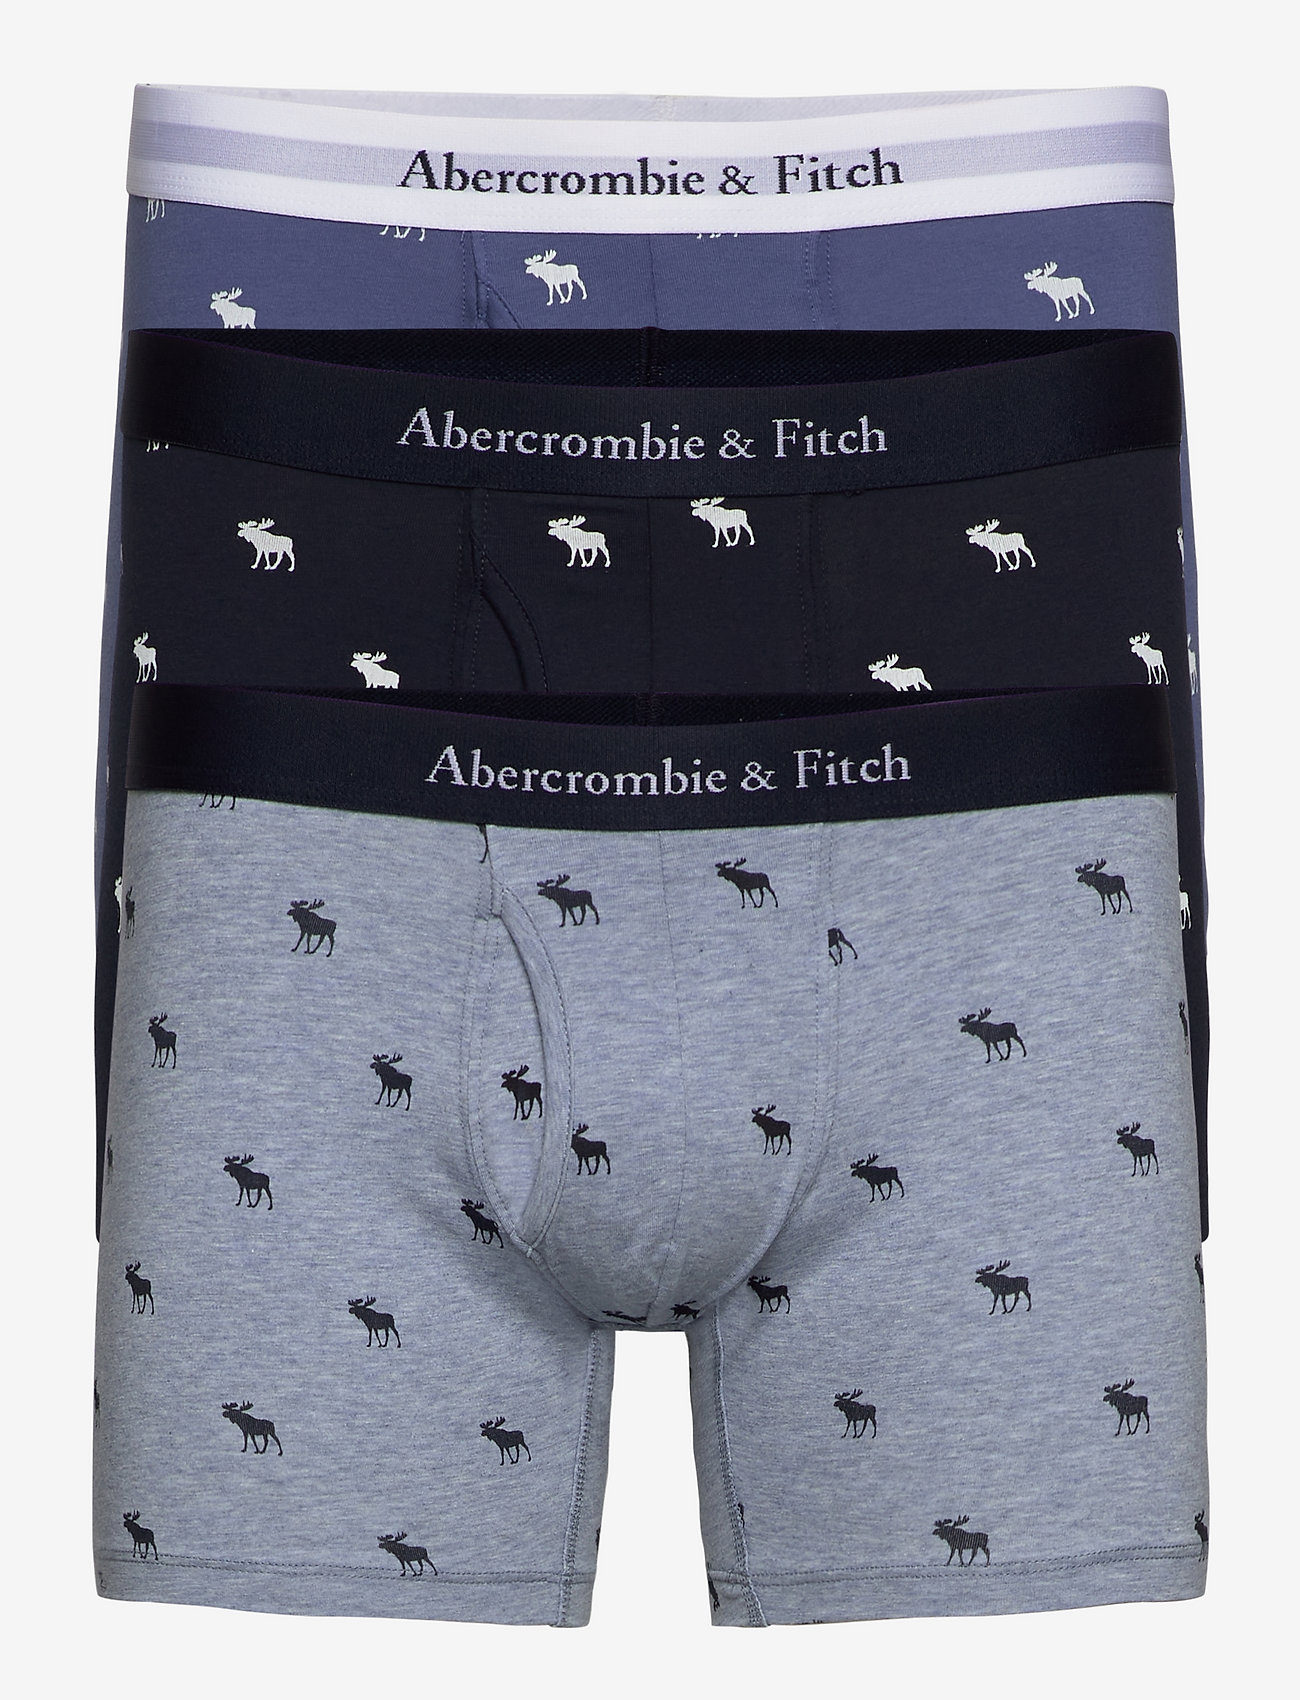 abercrombie and fitch boxers